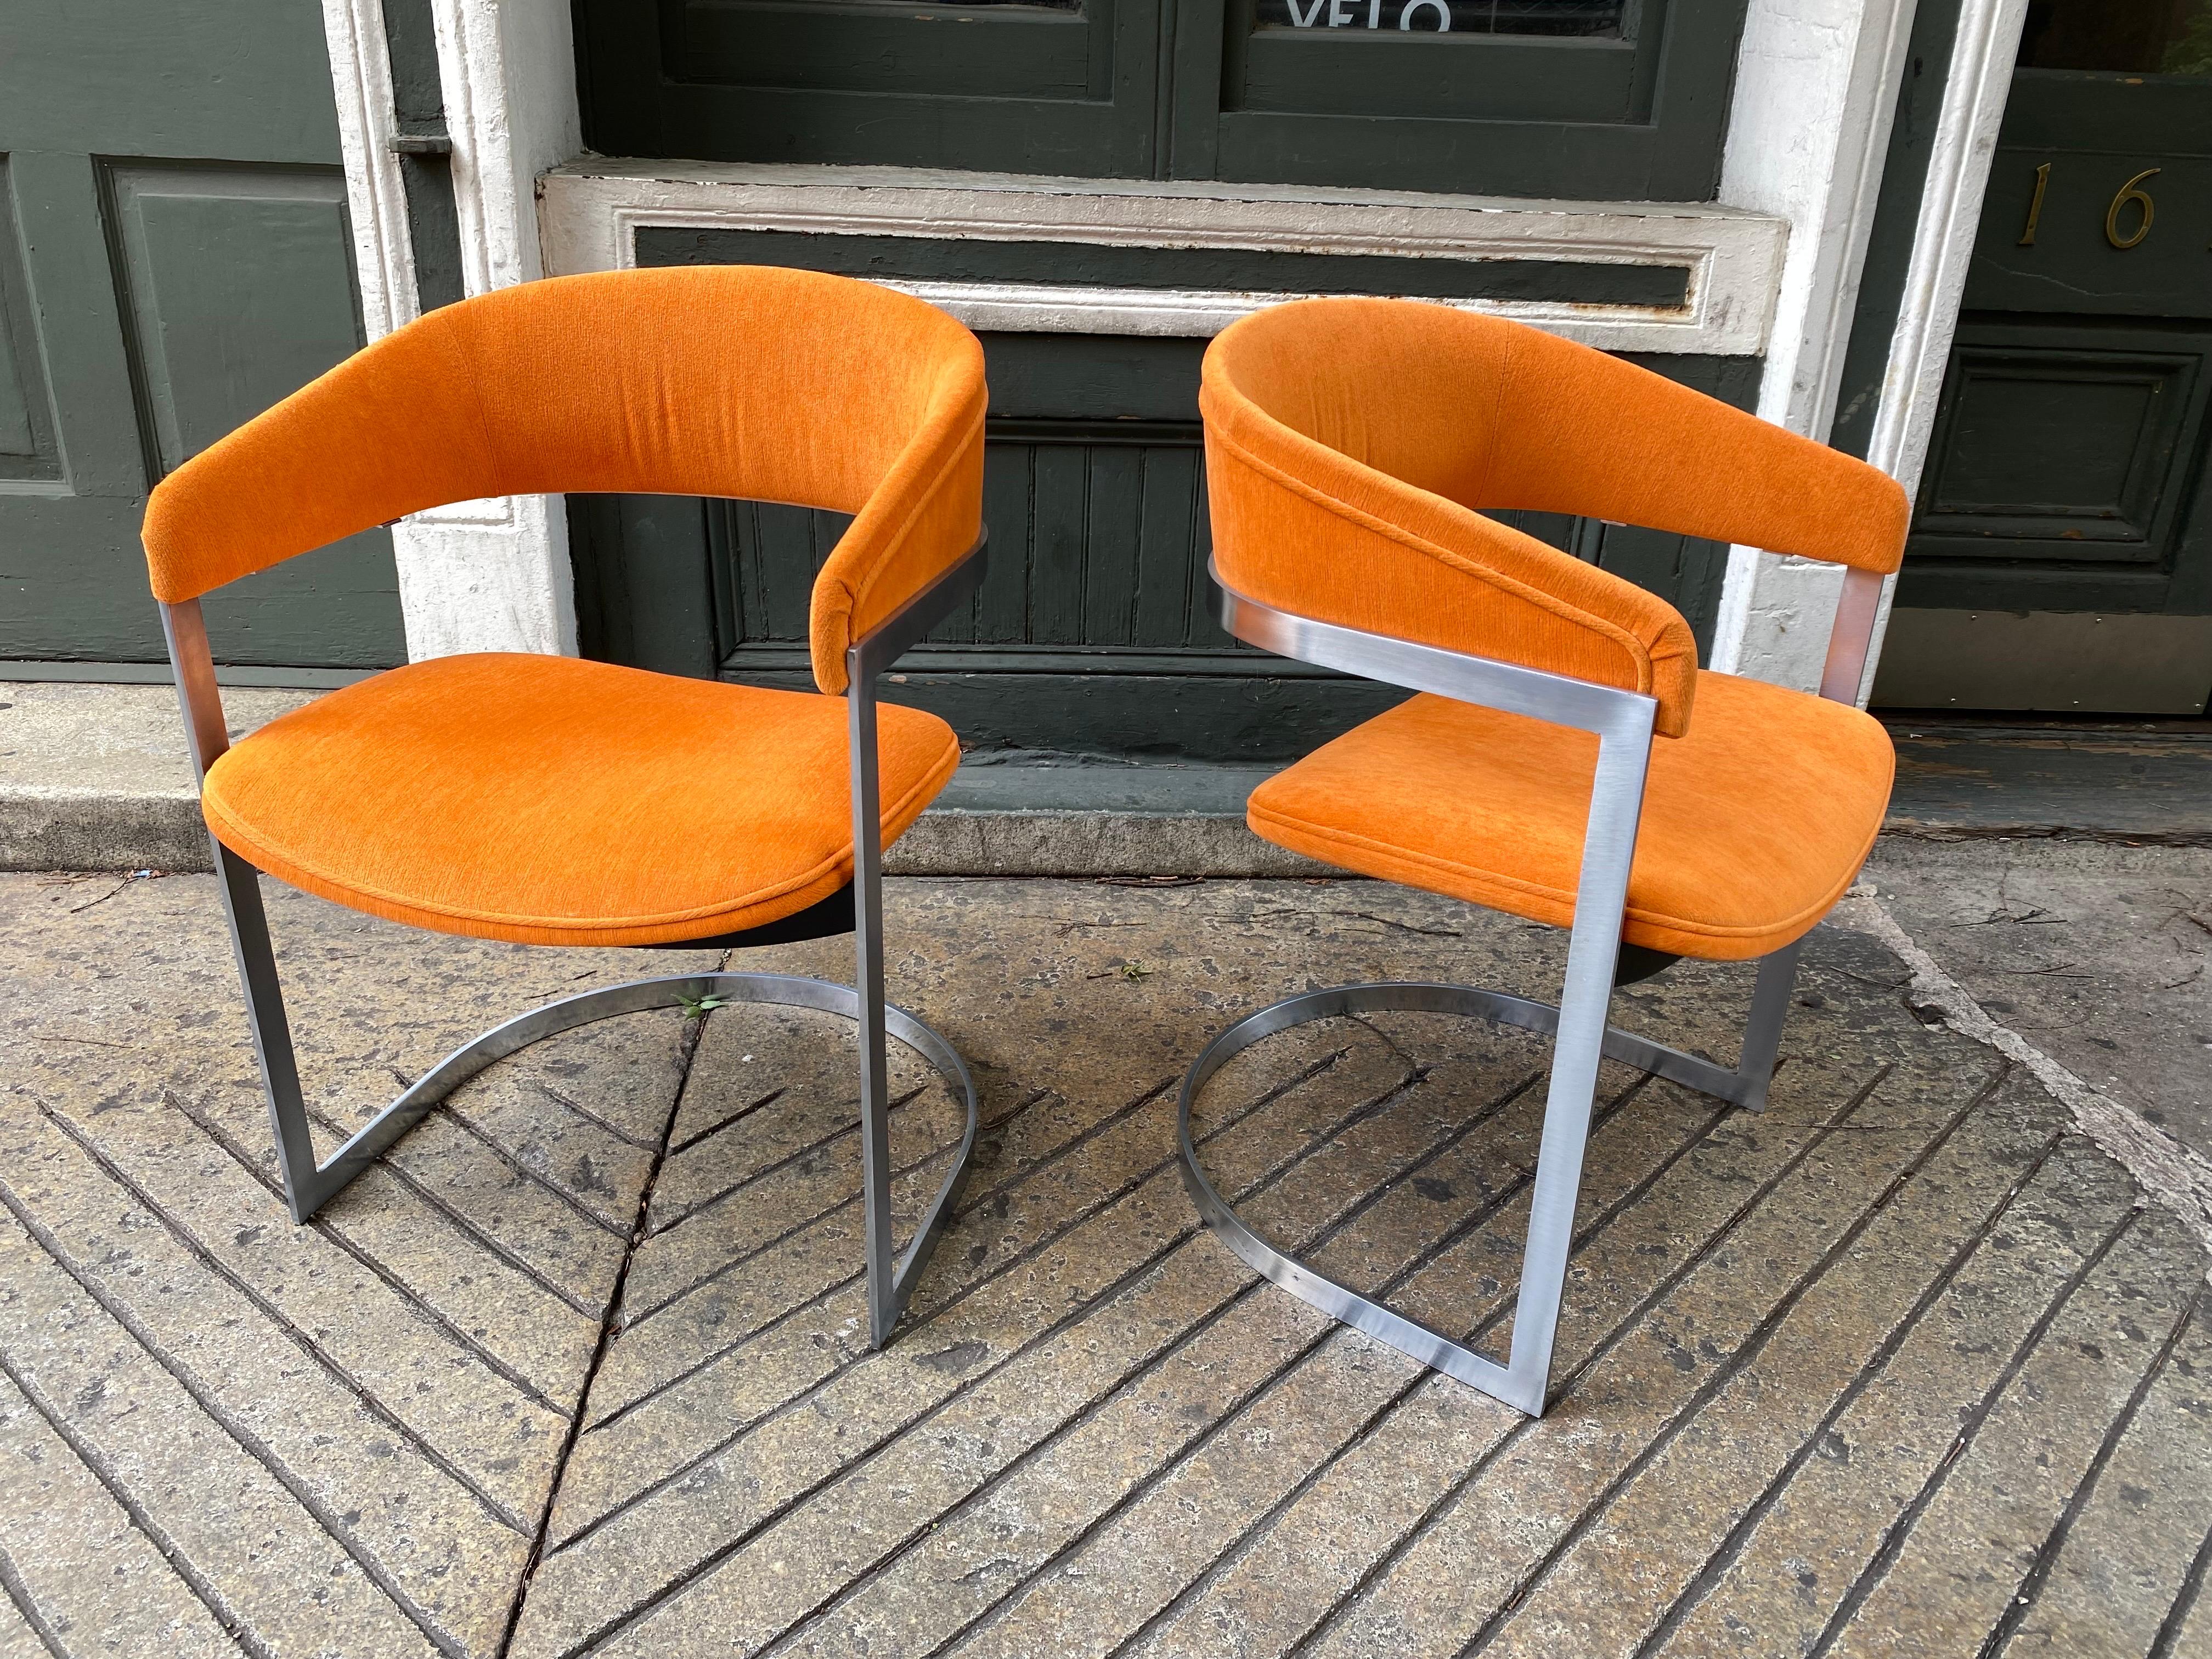 Aluminum chairs with orange upholstery, in the style of Milo Baughman for Thayer Coggin. Reupholstered in the last couple of years. Stylist and Comfortable! Aluminum is very clean! Perfect for that extra seating when company comes over or with a